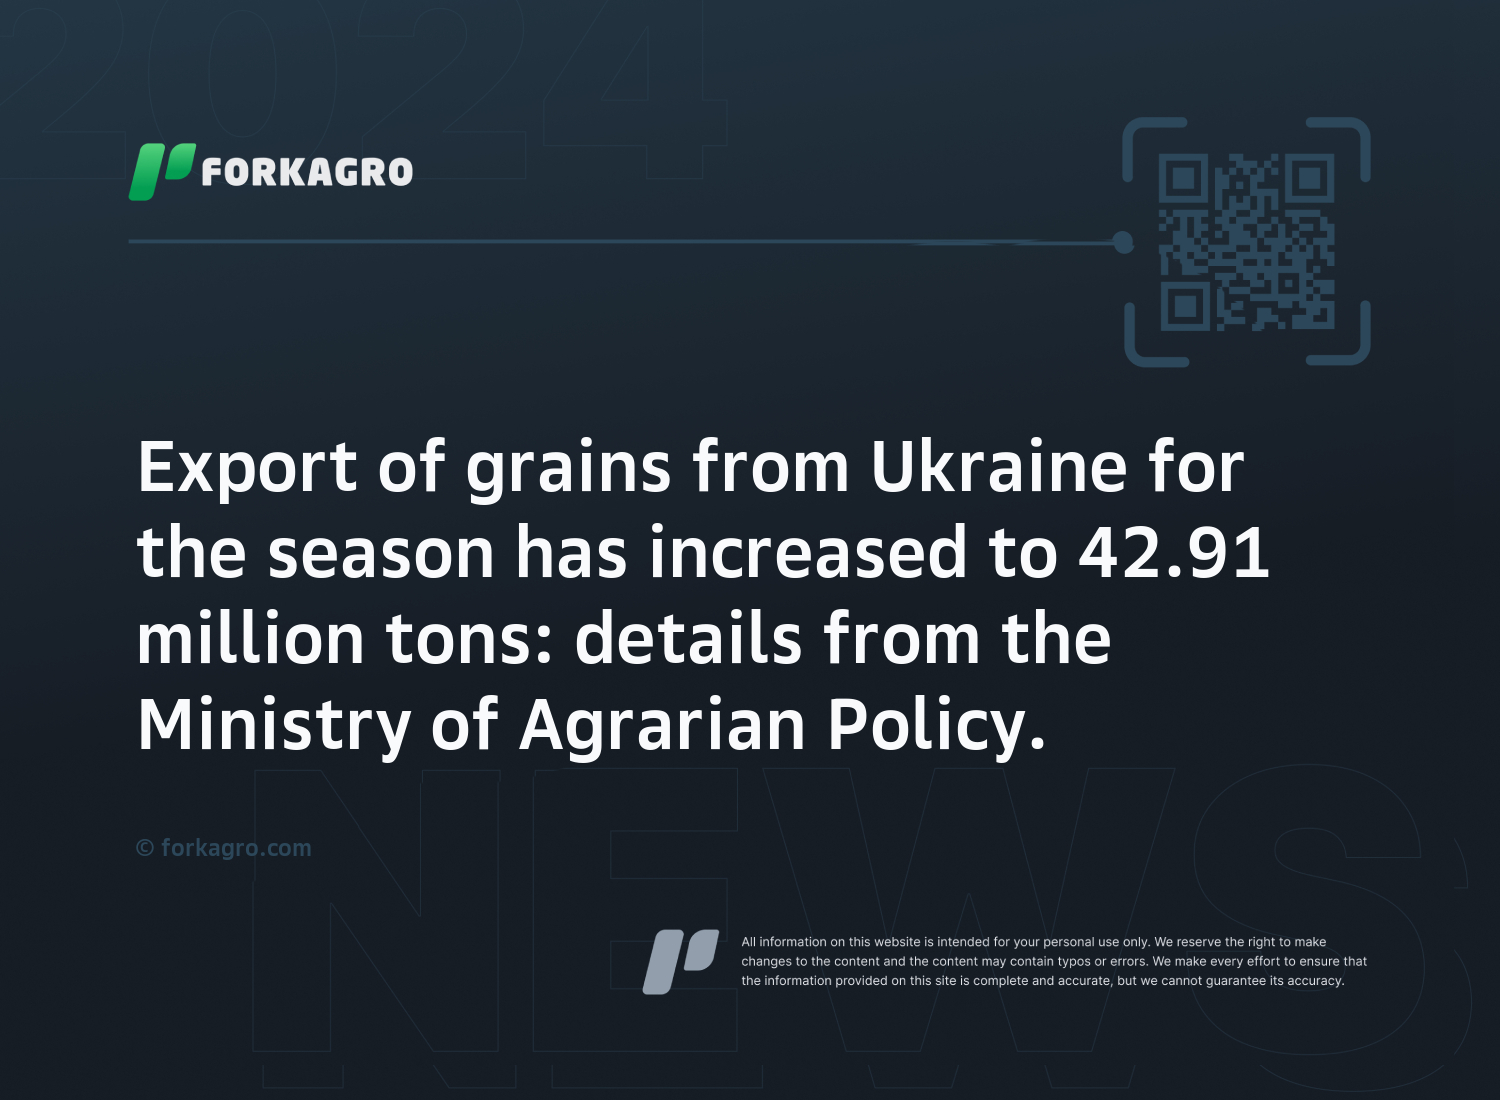 Export of grains from Ukraine for the season has increased to 42.91 million tons: details from the Ministry of Agrarian Policy.